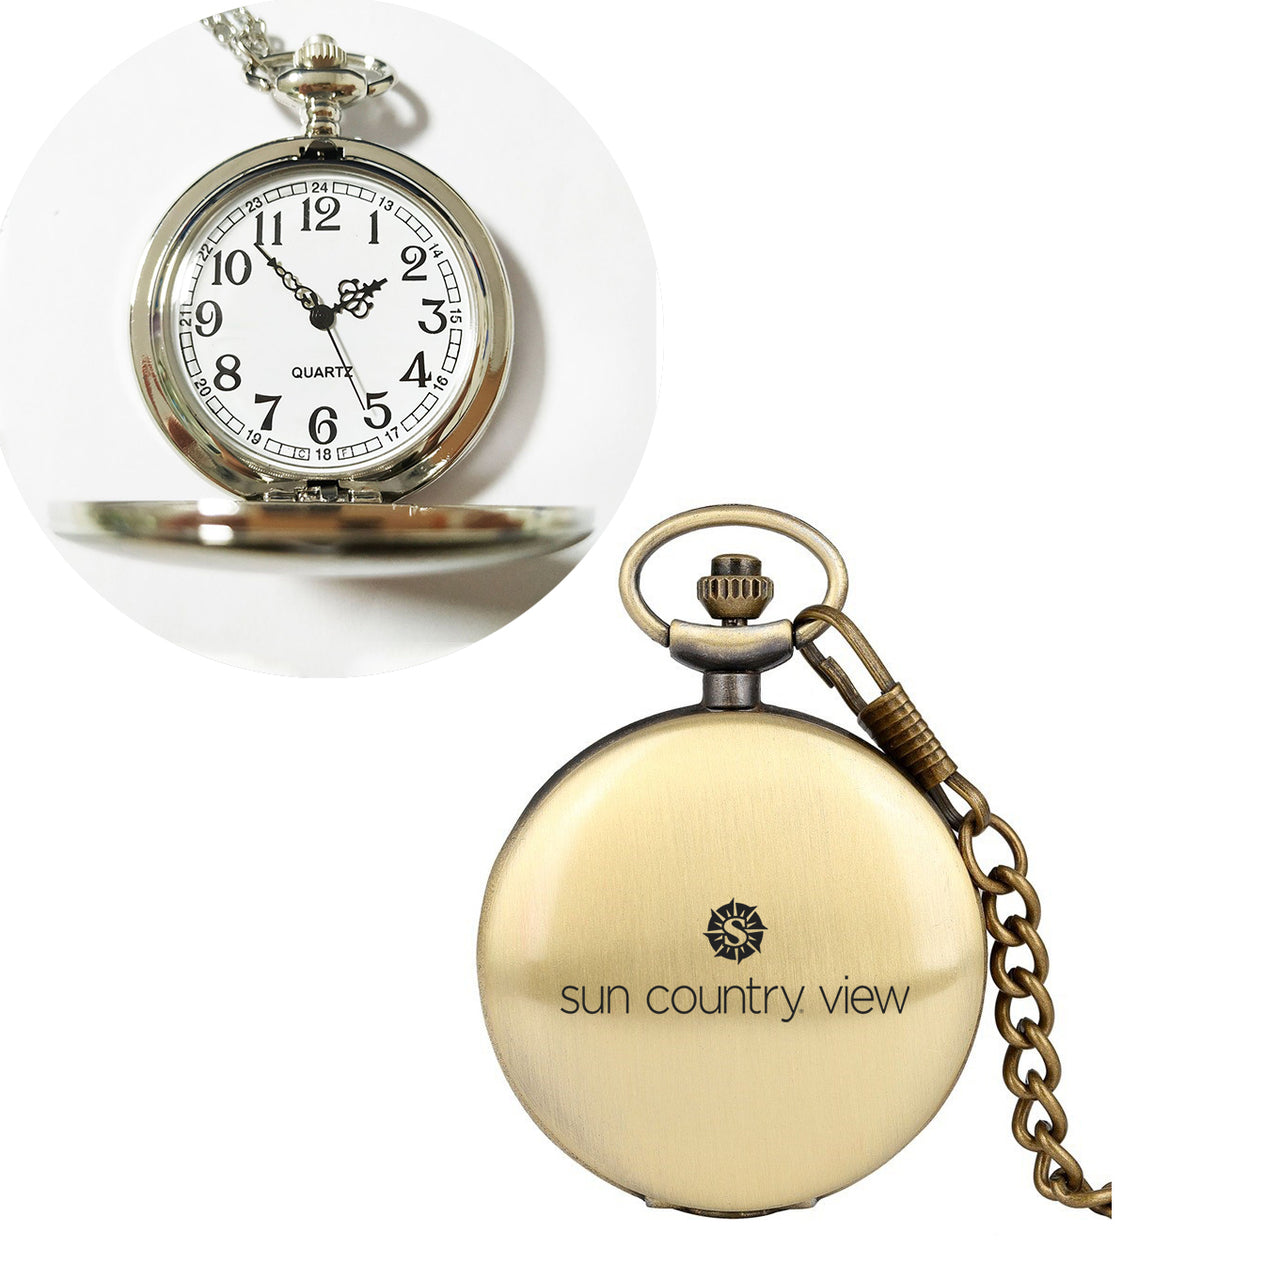 Sun Country Airlines Designed Pocket Watches